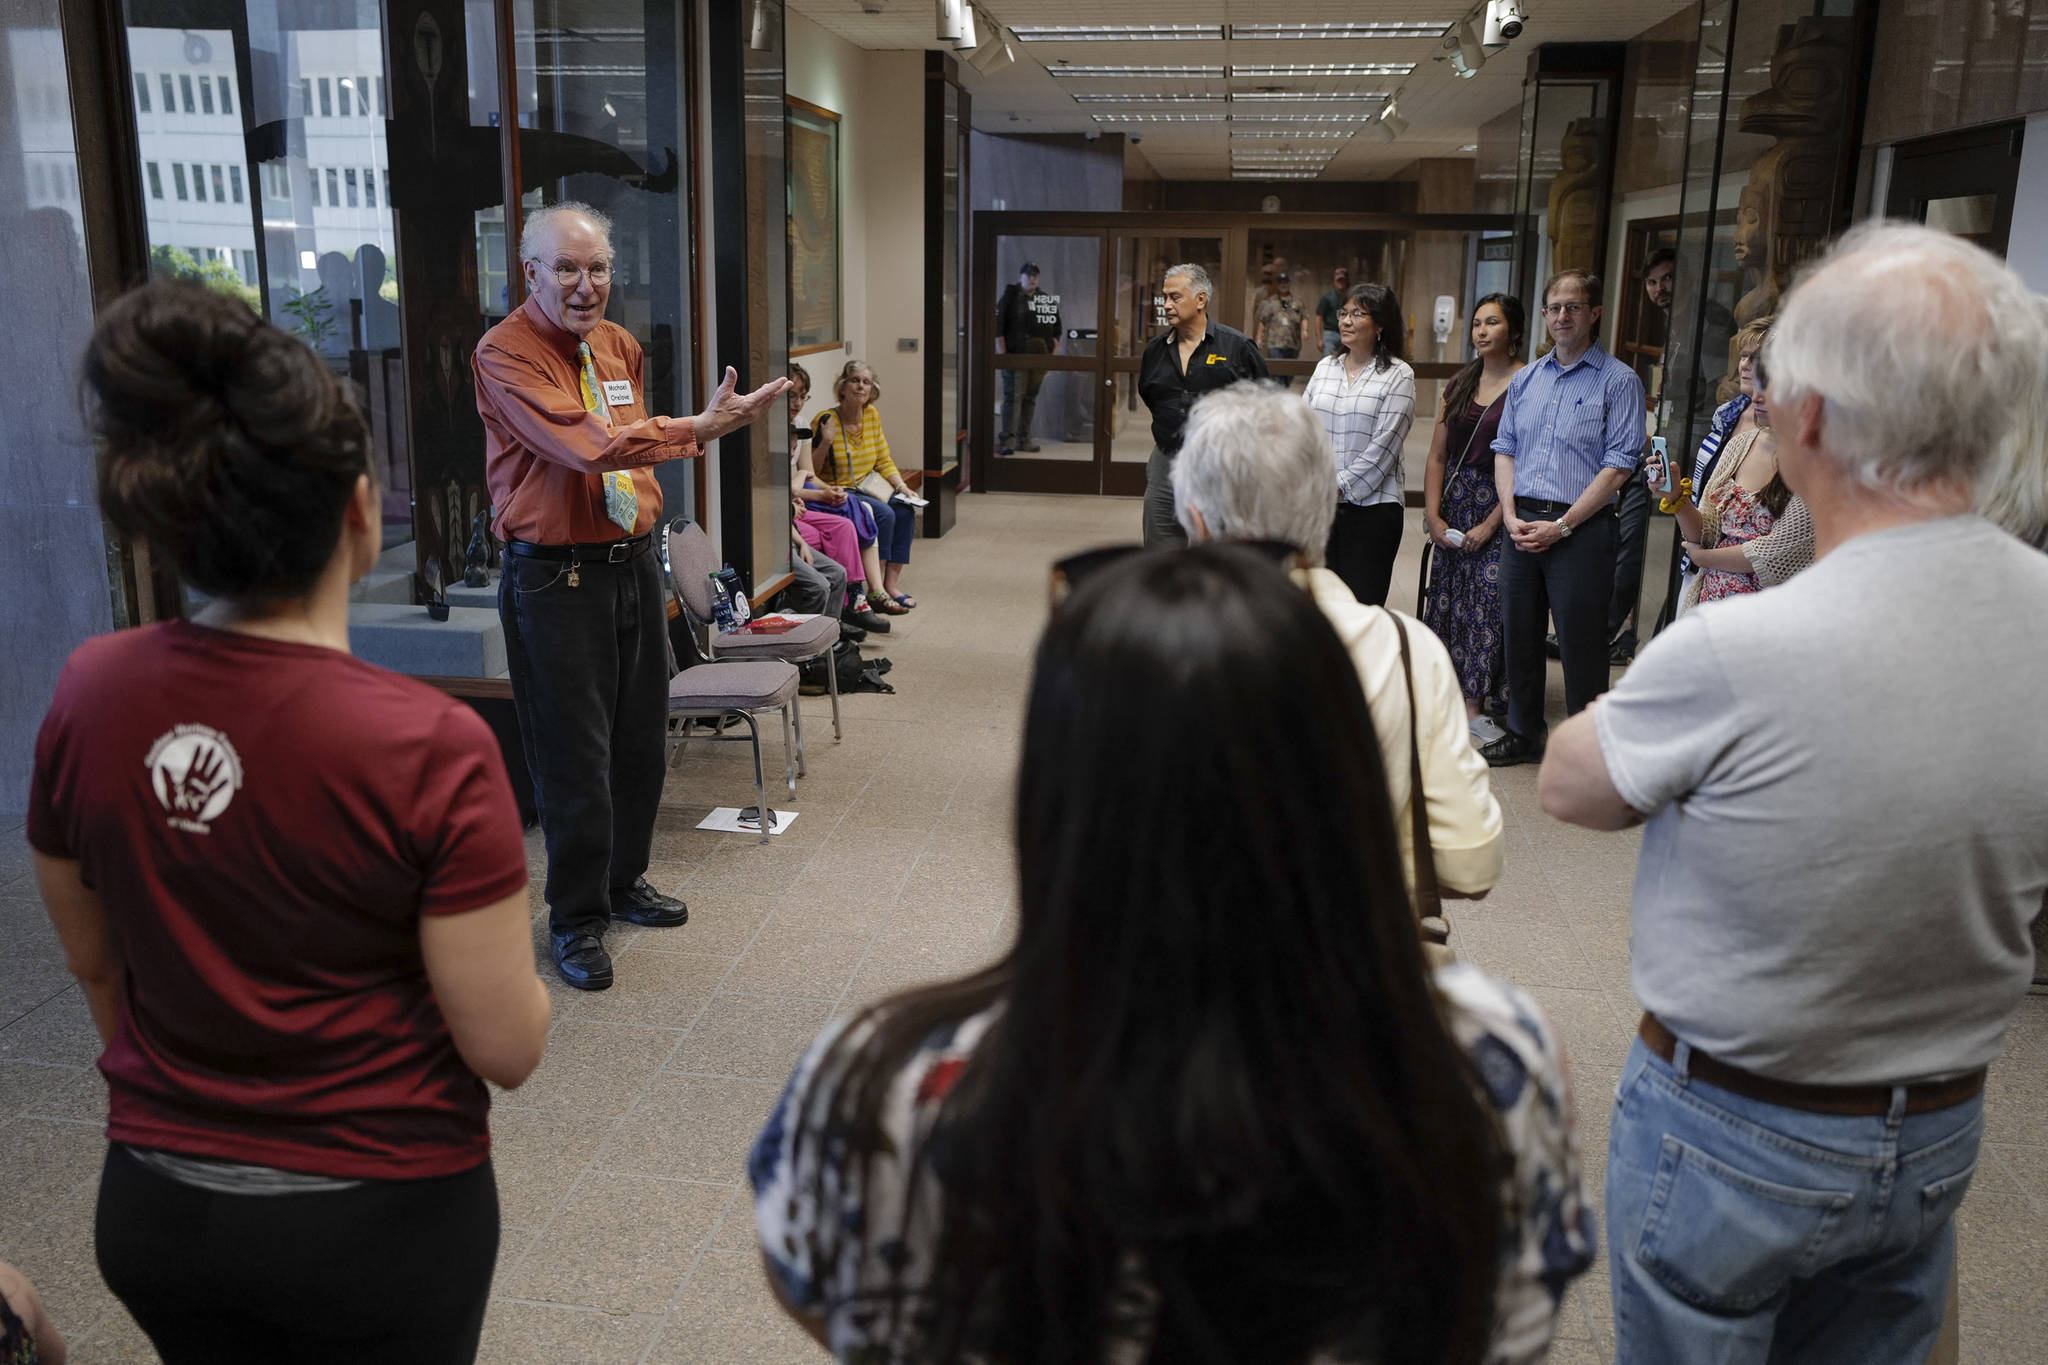 Michael Orelove talks about the making of the 1994 Juneau Time Capsule on its 25th anniversary at the Hurff Ackerman Saunders Federal Building in Juneau on Friday, Aug. 9, 2019. (Michael Penn | Juneau Empire)